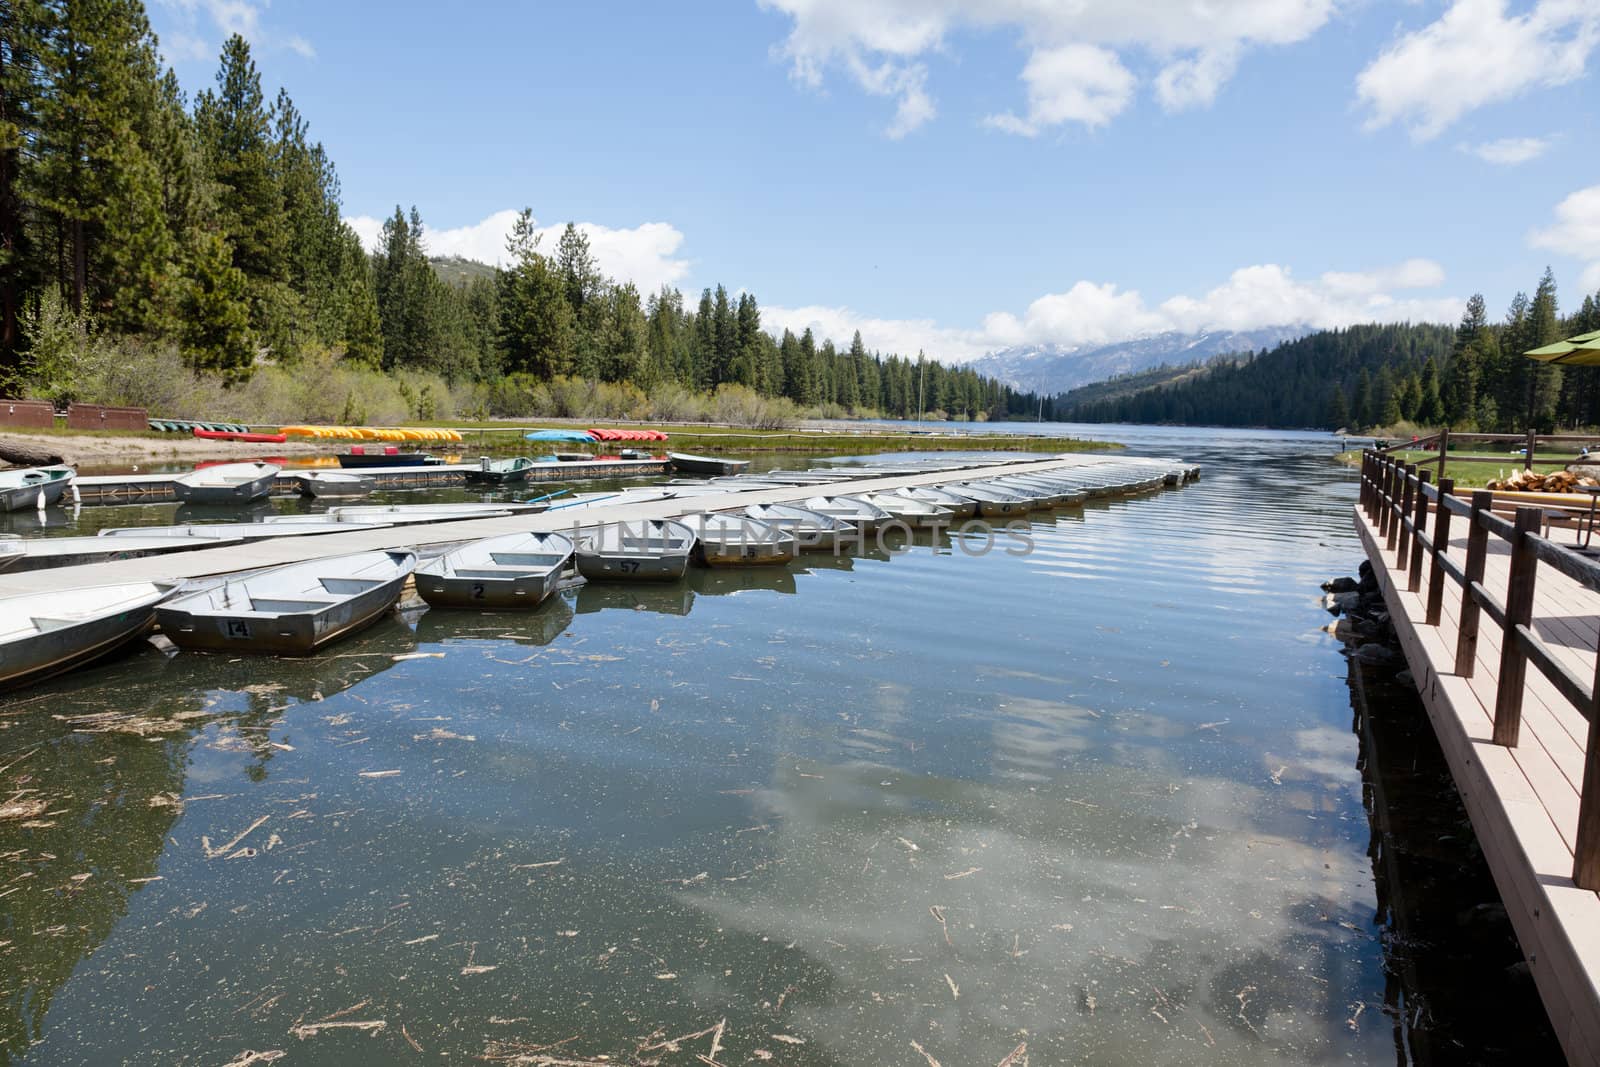 Hume Lake is an artificial lake in the Sequoia National Forest of Fresno County, California